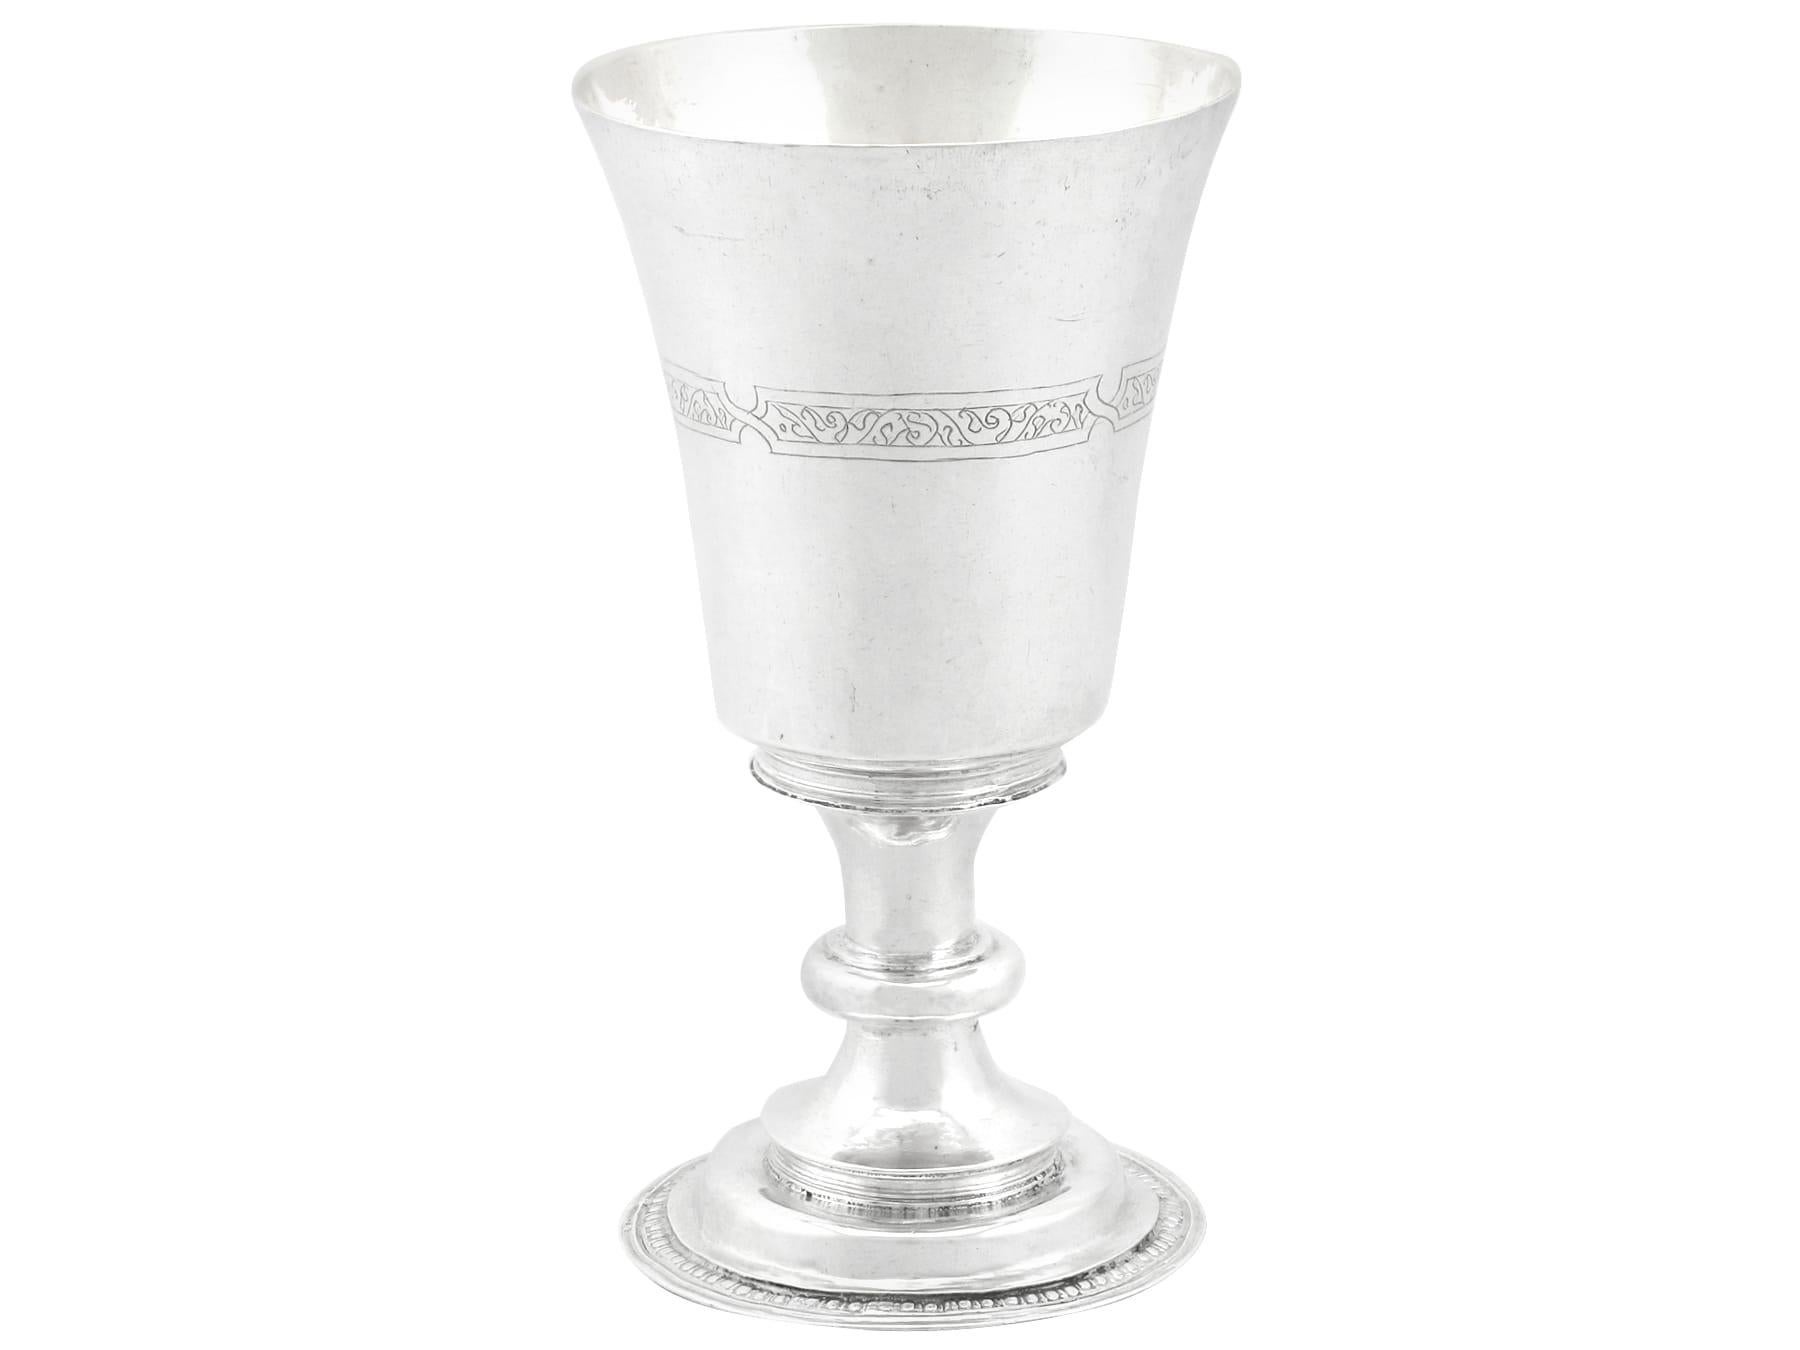 1500s Elizabethan Sterling Silver Communion Chalice and Paten In Excellent Condition For Sale In Jesmond, Newcastle Upon Tyne